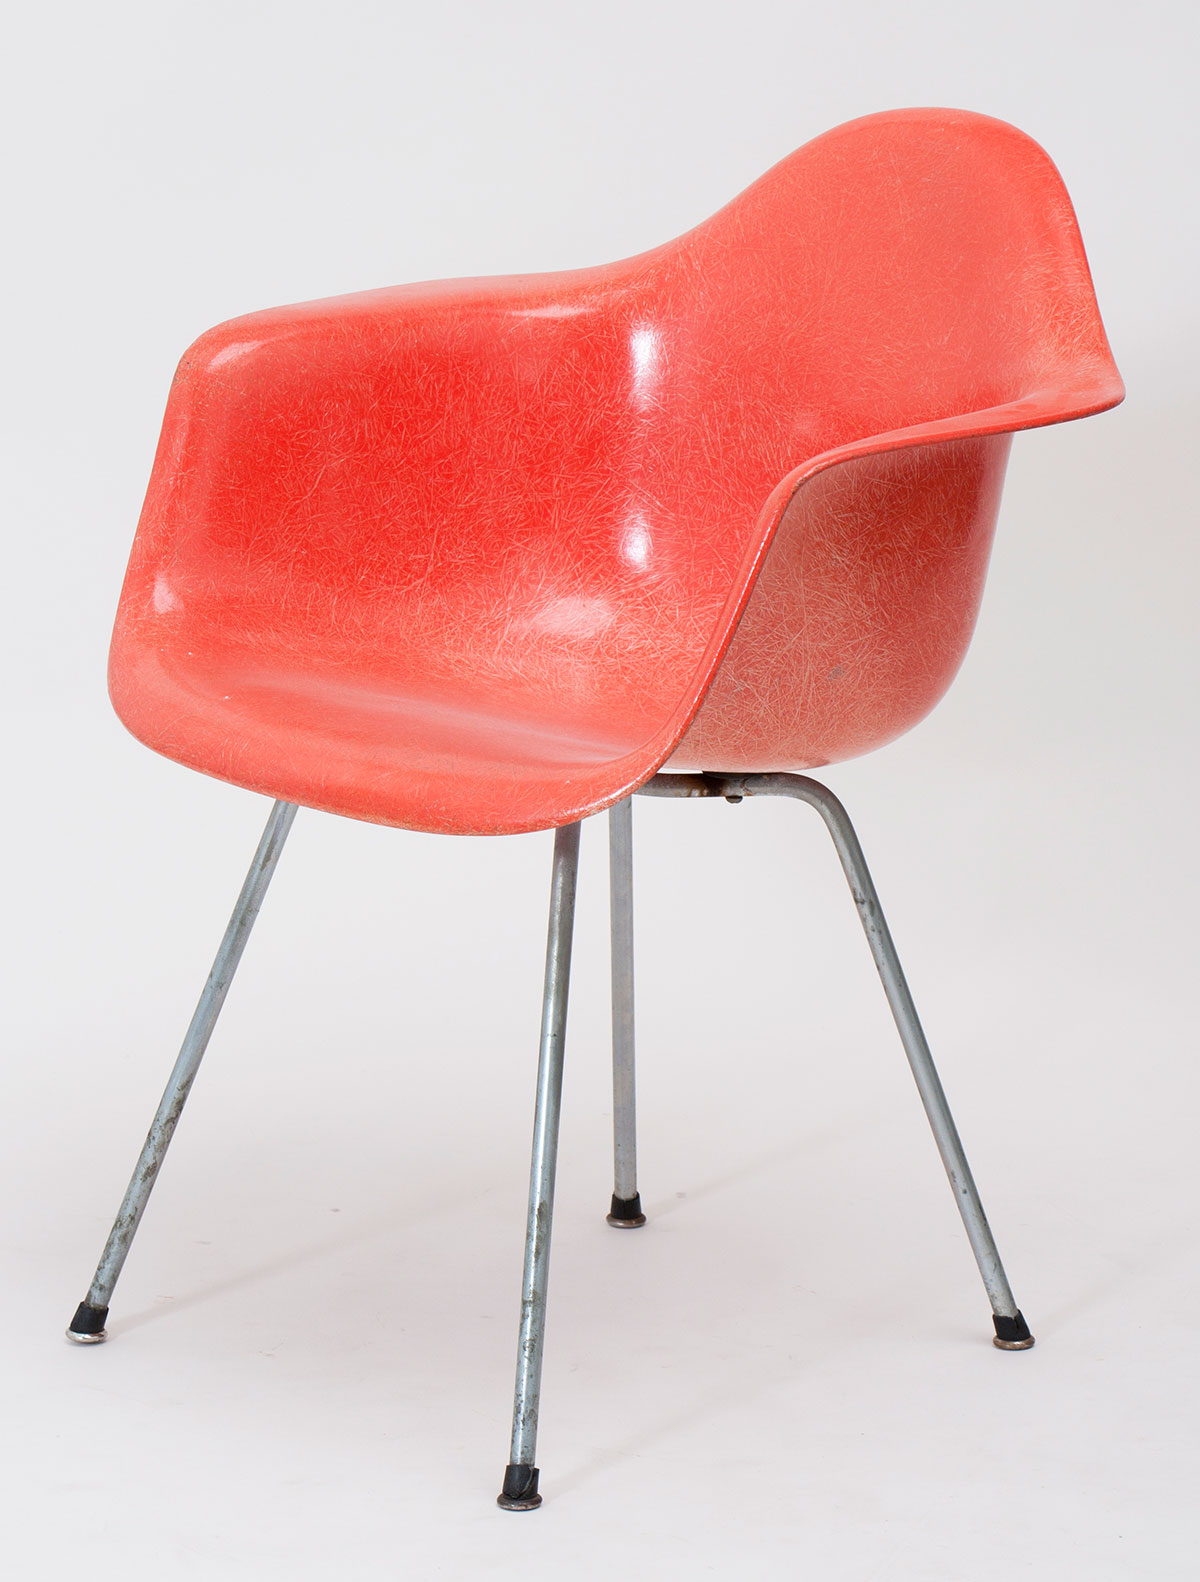 1705 charles eames shell chair patrick parrish 0005